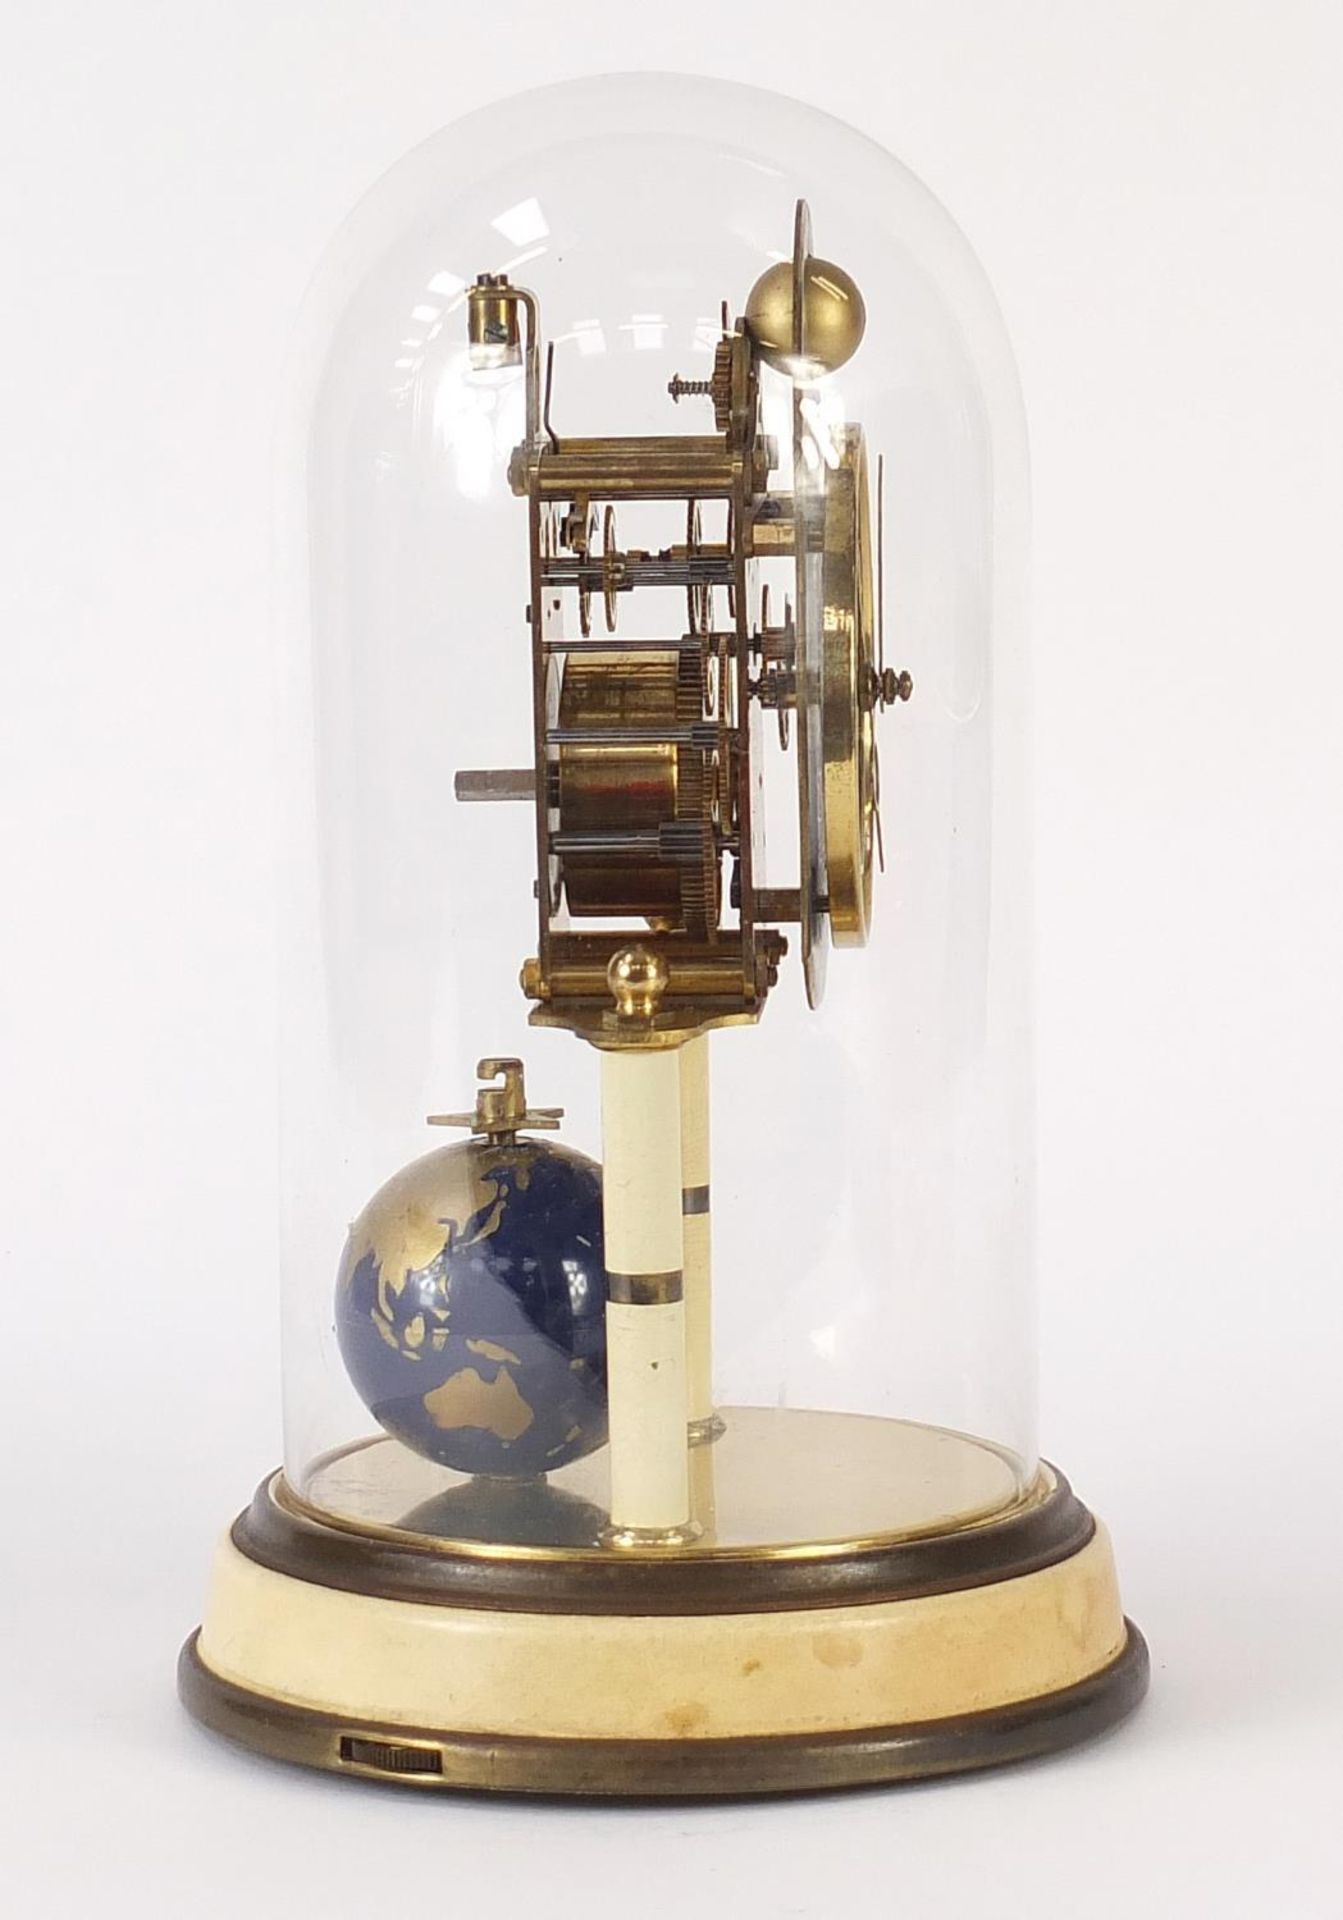 Kaiser four hundred day globe clock with glass dome, 26.5cm high - Image 4 of 5